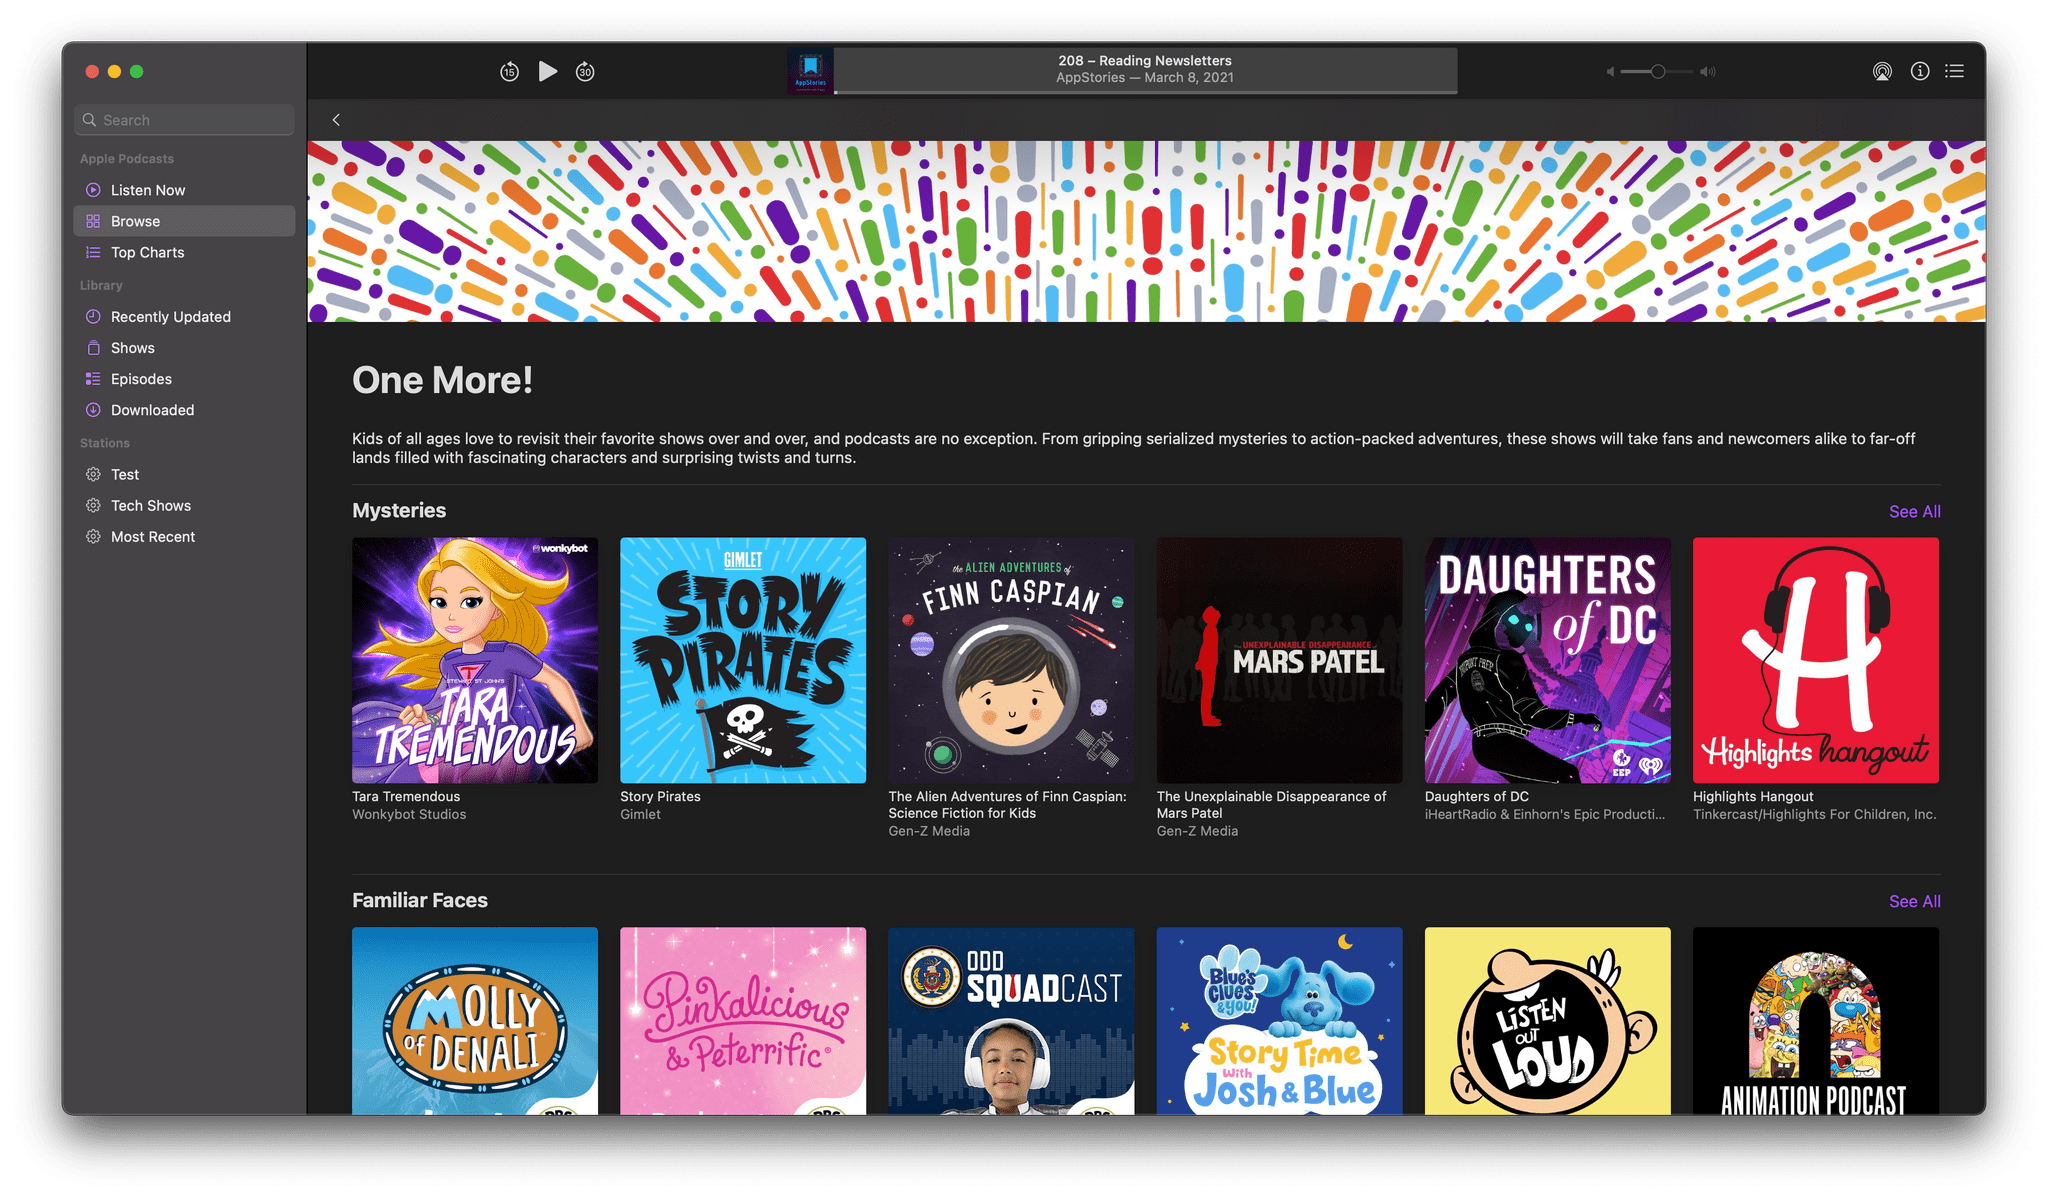 Some of the shows spotlighted in the One More! collection in Apple Podcasts.